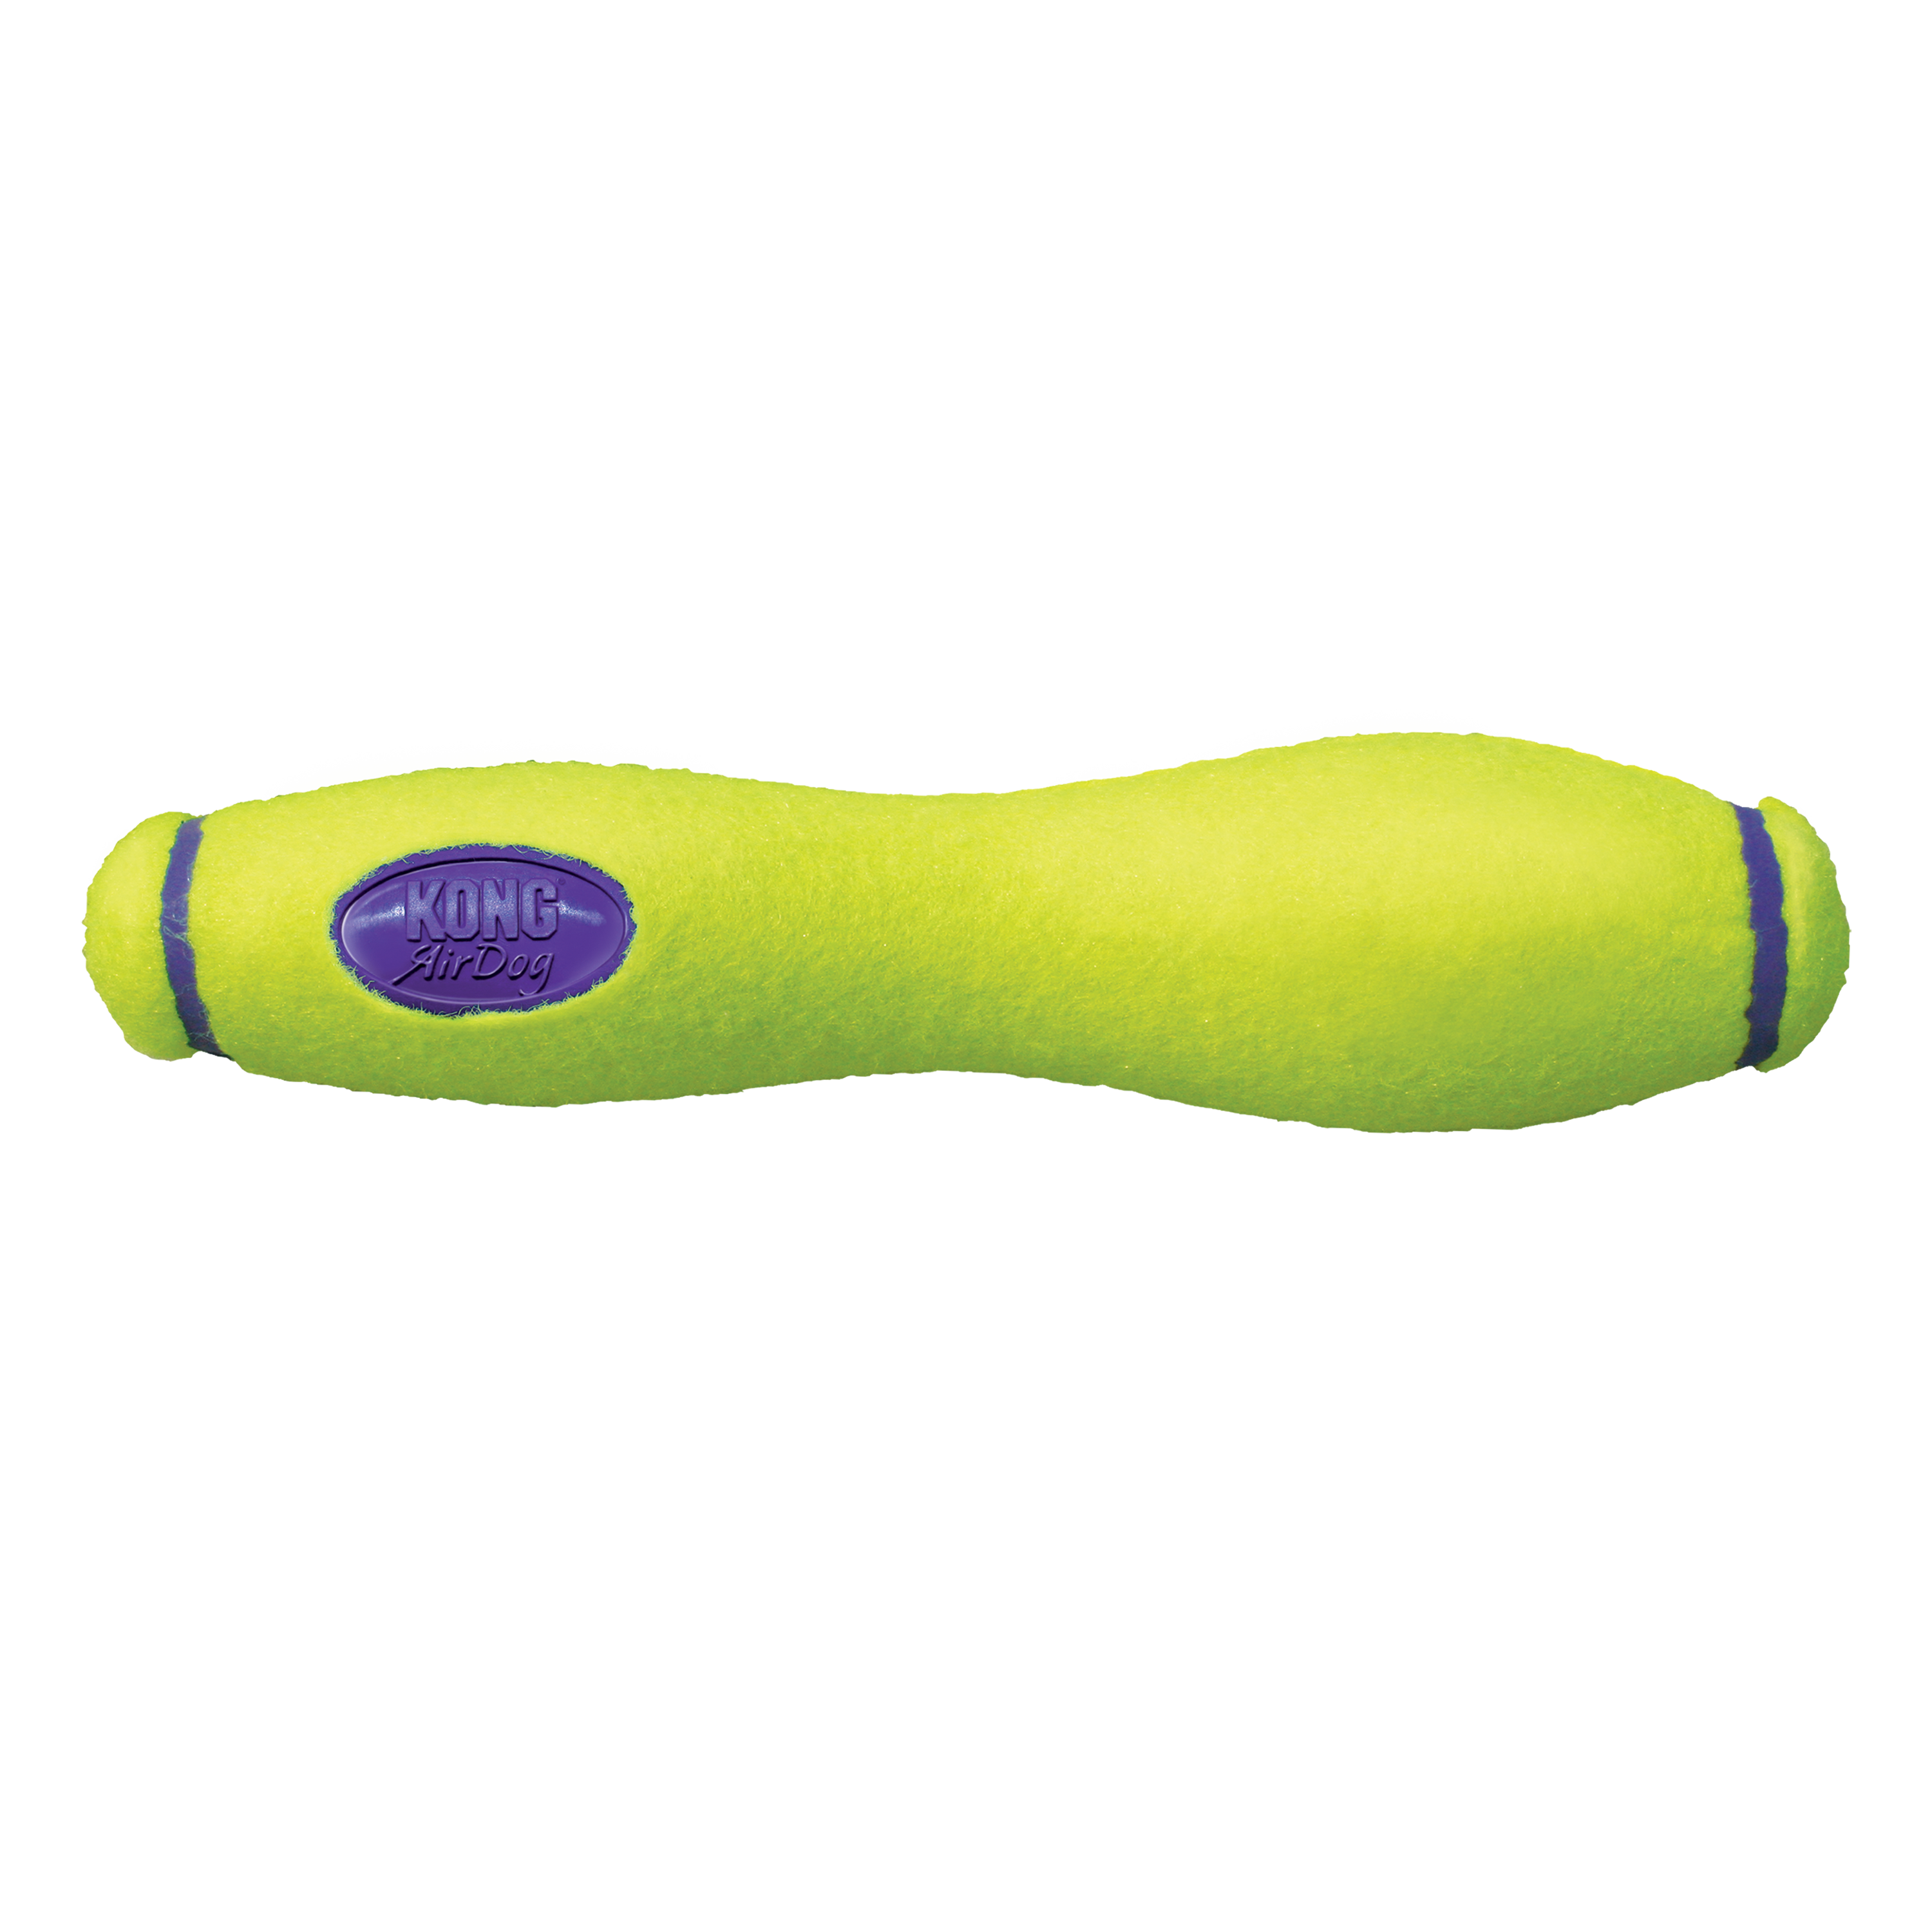 AirDog Squeaker Stick offpack product image